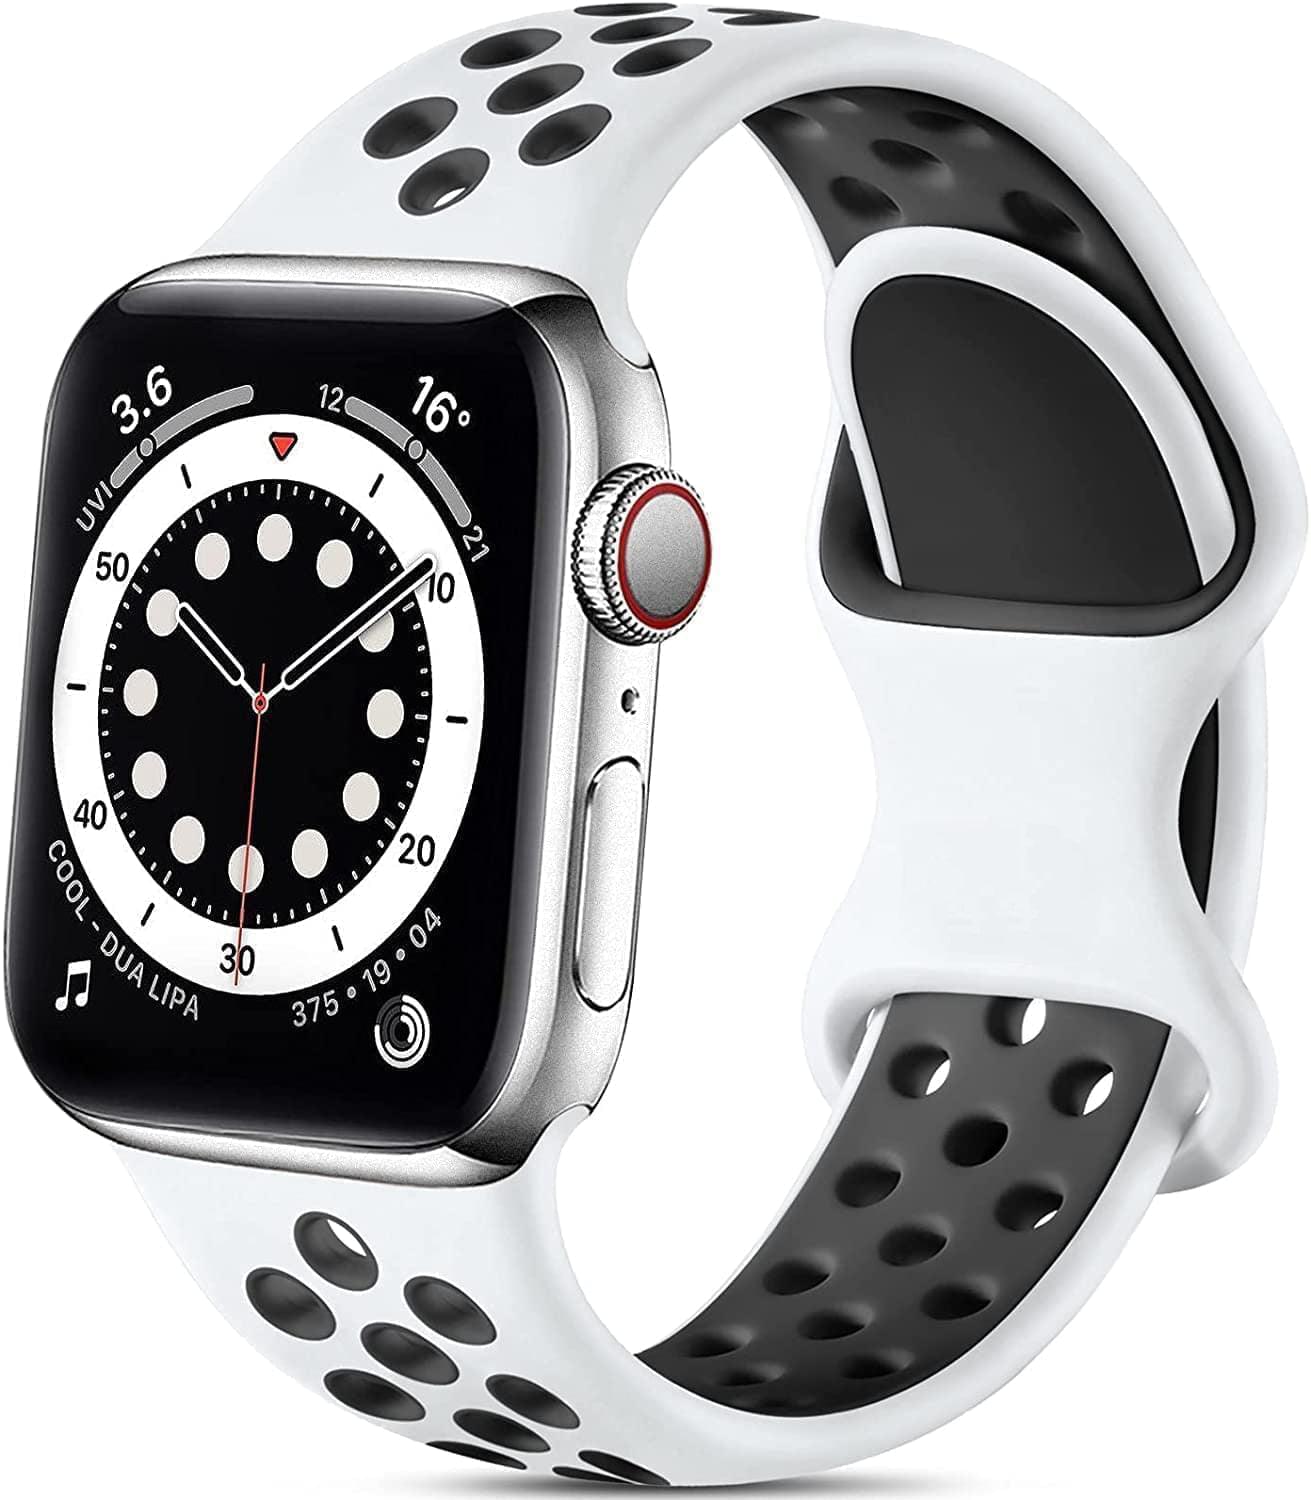 RUN - Breathing silicone Apple Watch Band